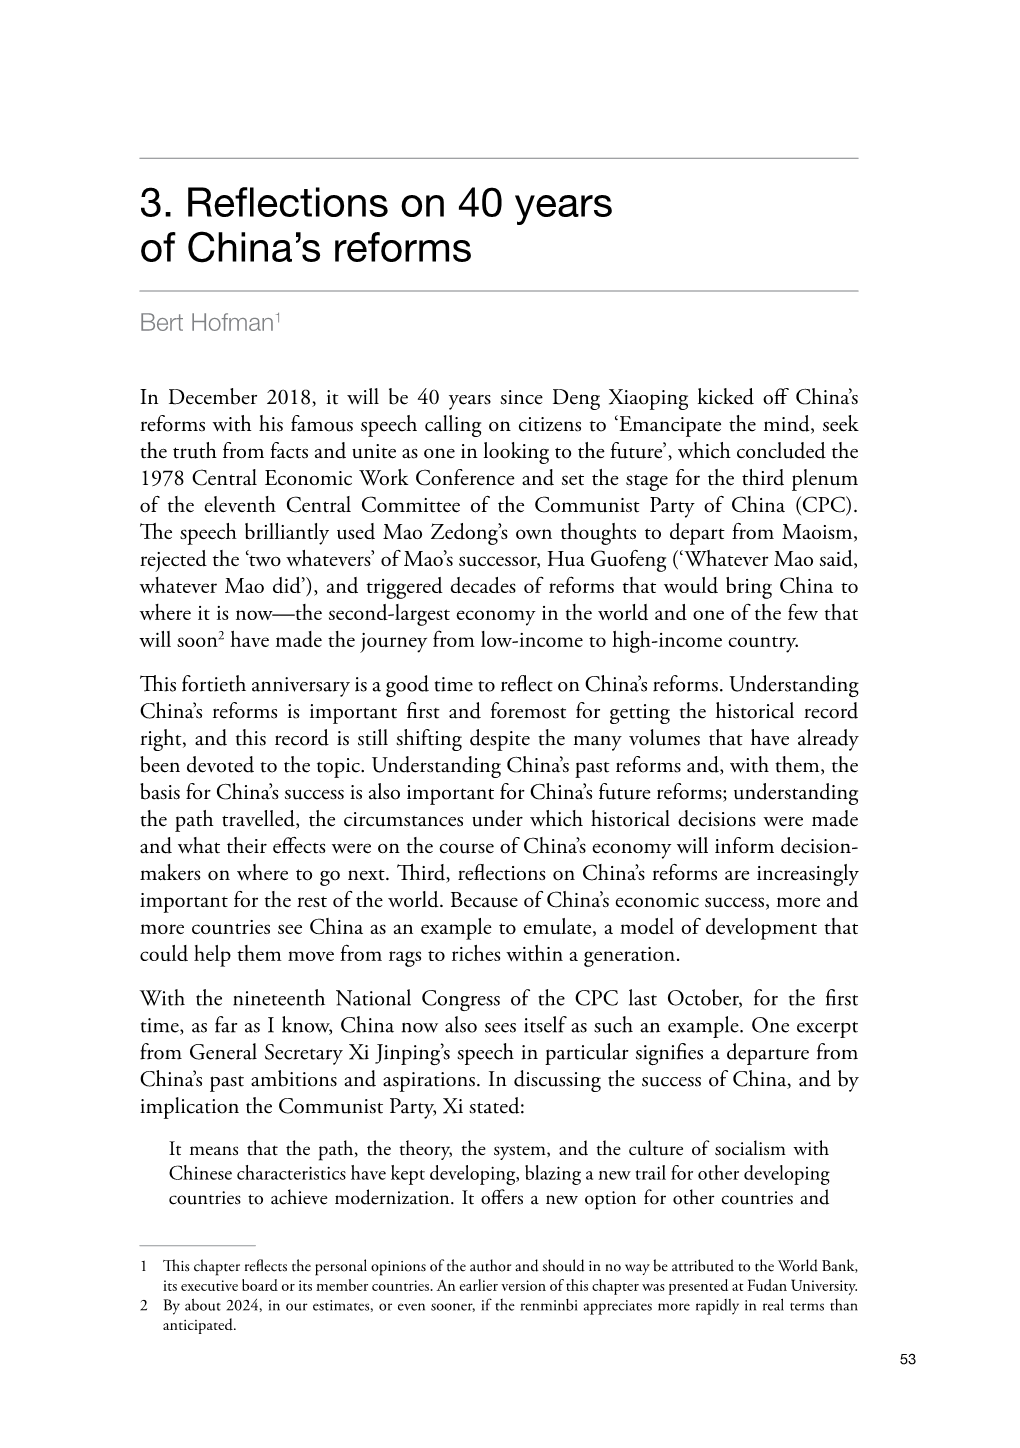 3. Reflections on 40 Years of China's Reforms